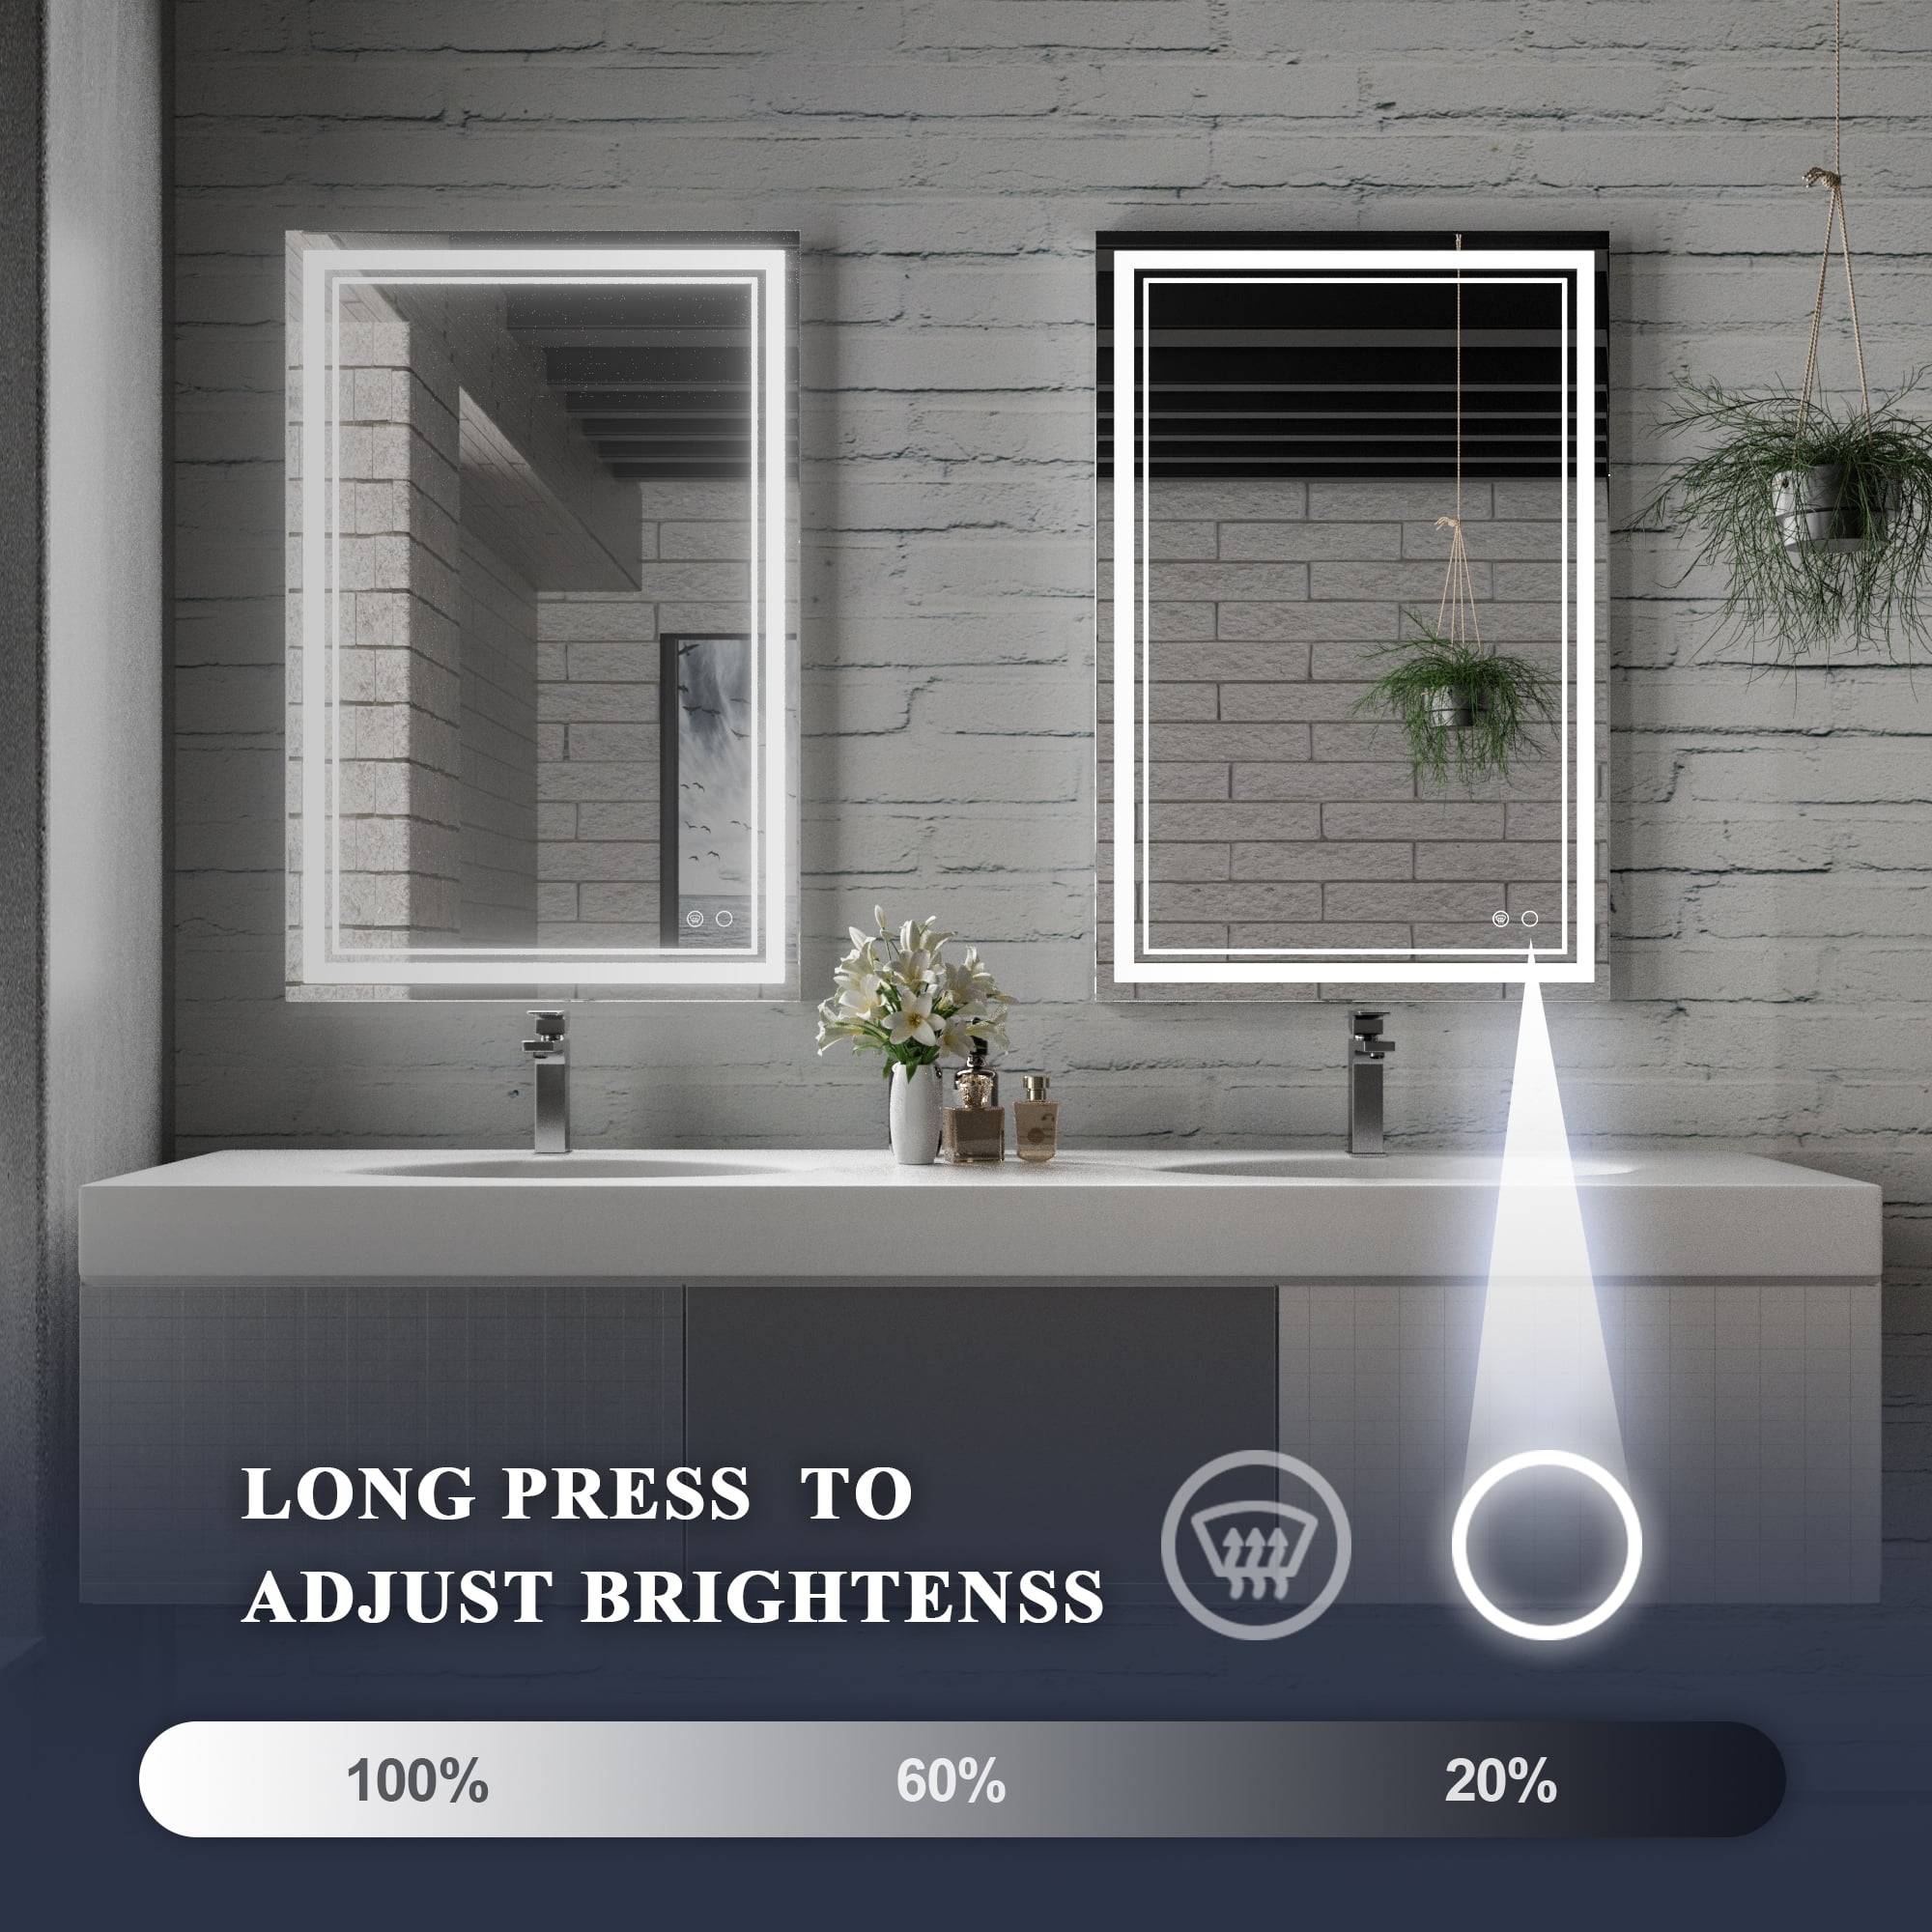 LED Frontlit Mirror Bathroom Mirror with Lights 3-Color Warm/Natural/White  High Lumens, Anti-Fog & Dimmer Wall Mounted Lighted Vanity Makeup  Mirror(Vertical/Horizontal) – Keonjinn